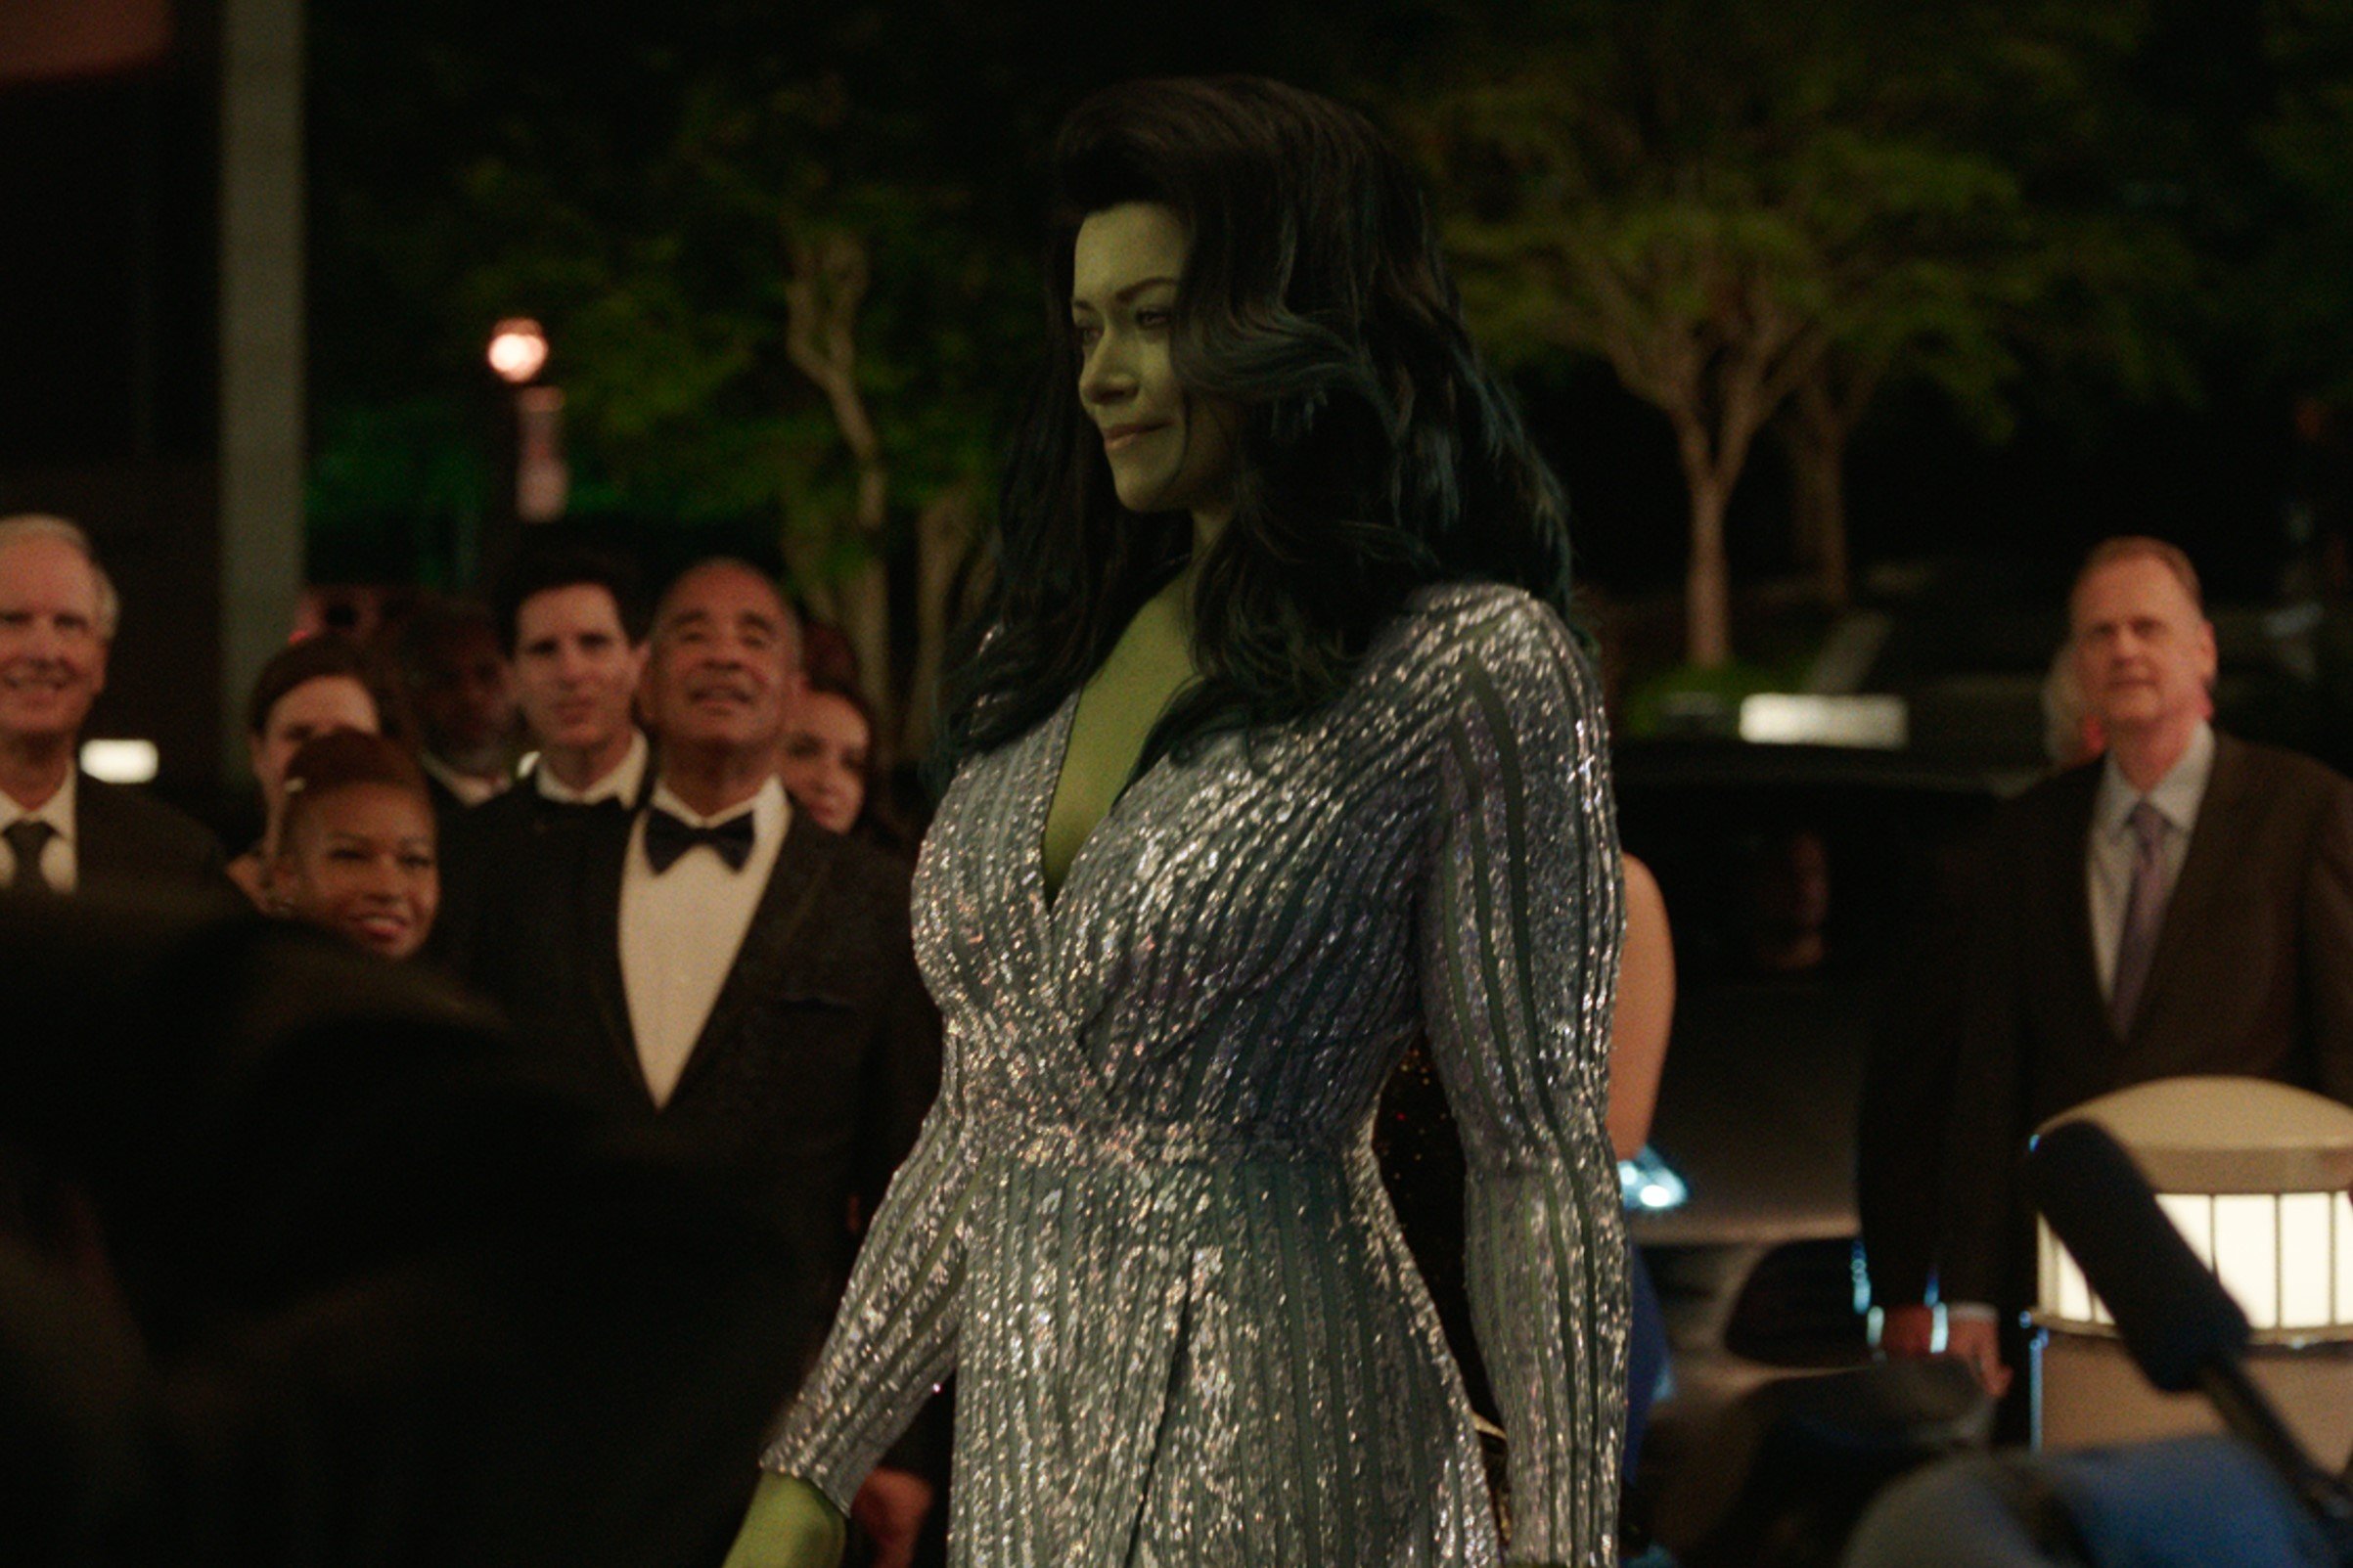 Tatiana Maslany, in character as Jennifer Walters/She-Hulk in 'She-Hulk: Attorney at Law,' wears a long-sleeved sparkly silver dress.